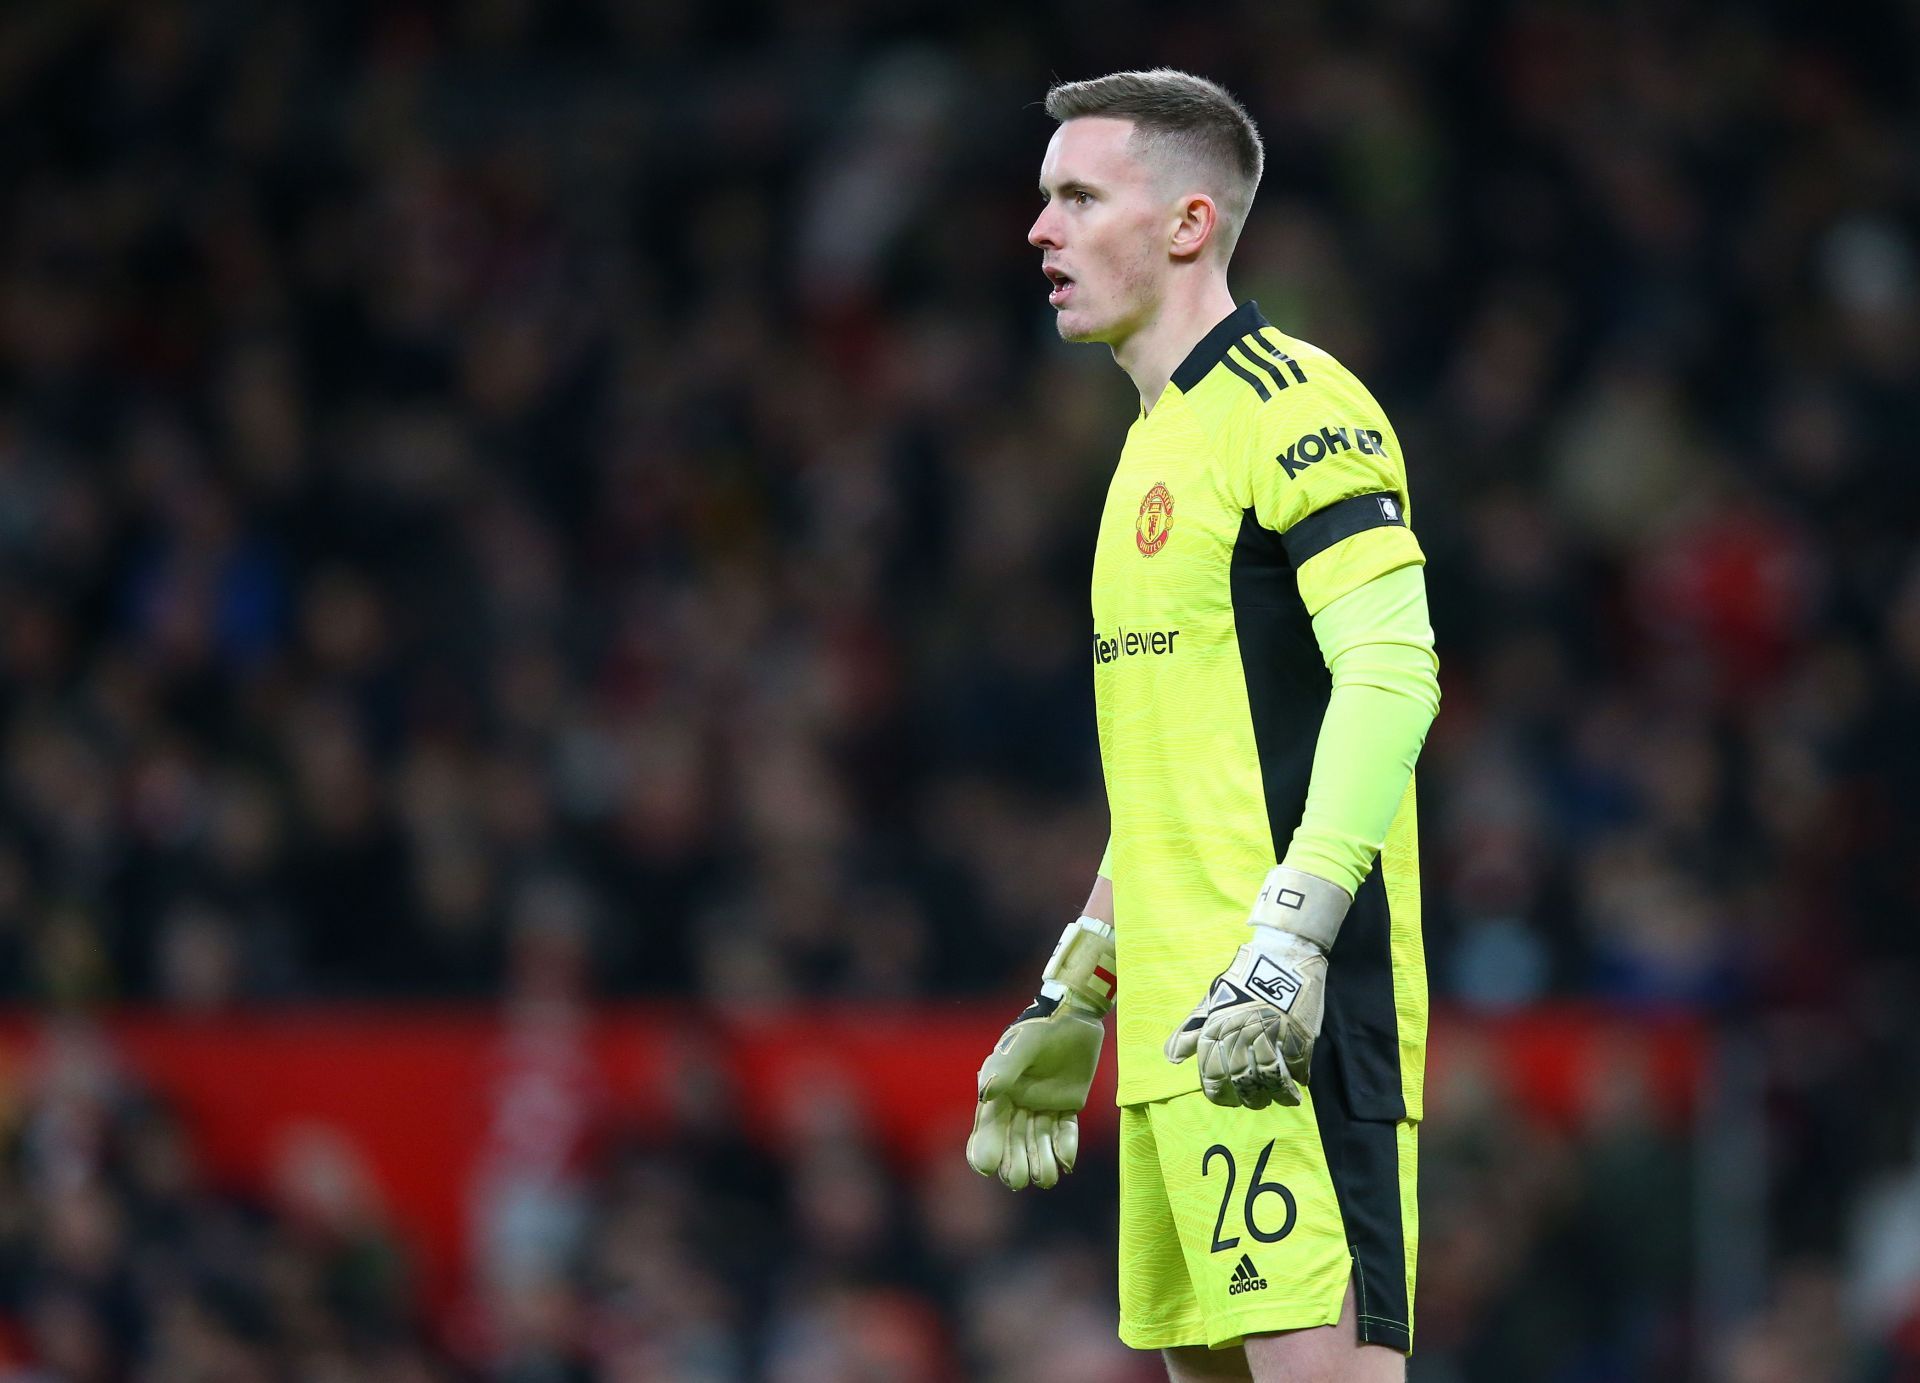 Dean Henderson in action against Middlesbrough: The Emirates FA Cup Fourth Round